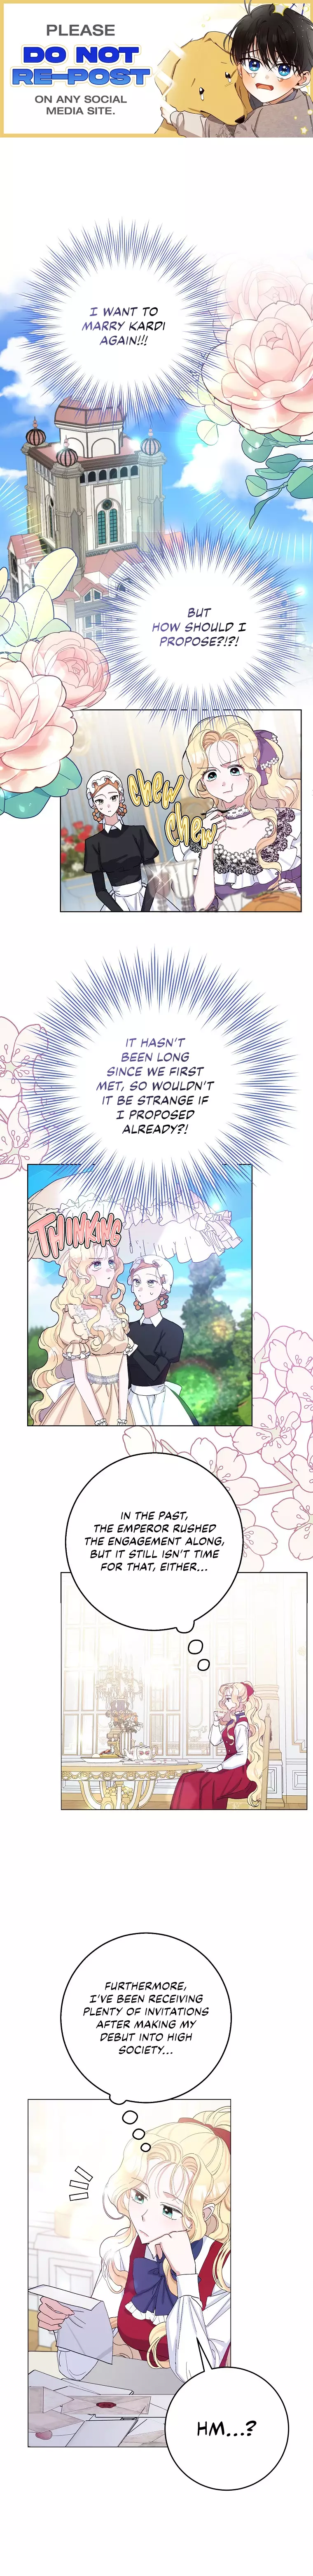 Please Marry Me Again, Husband! - 24 page 1-20dd4b46